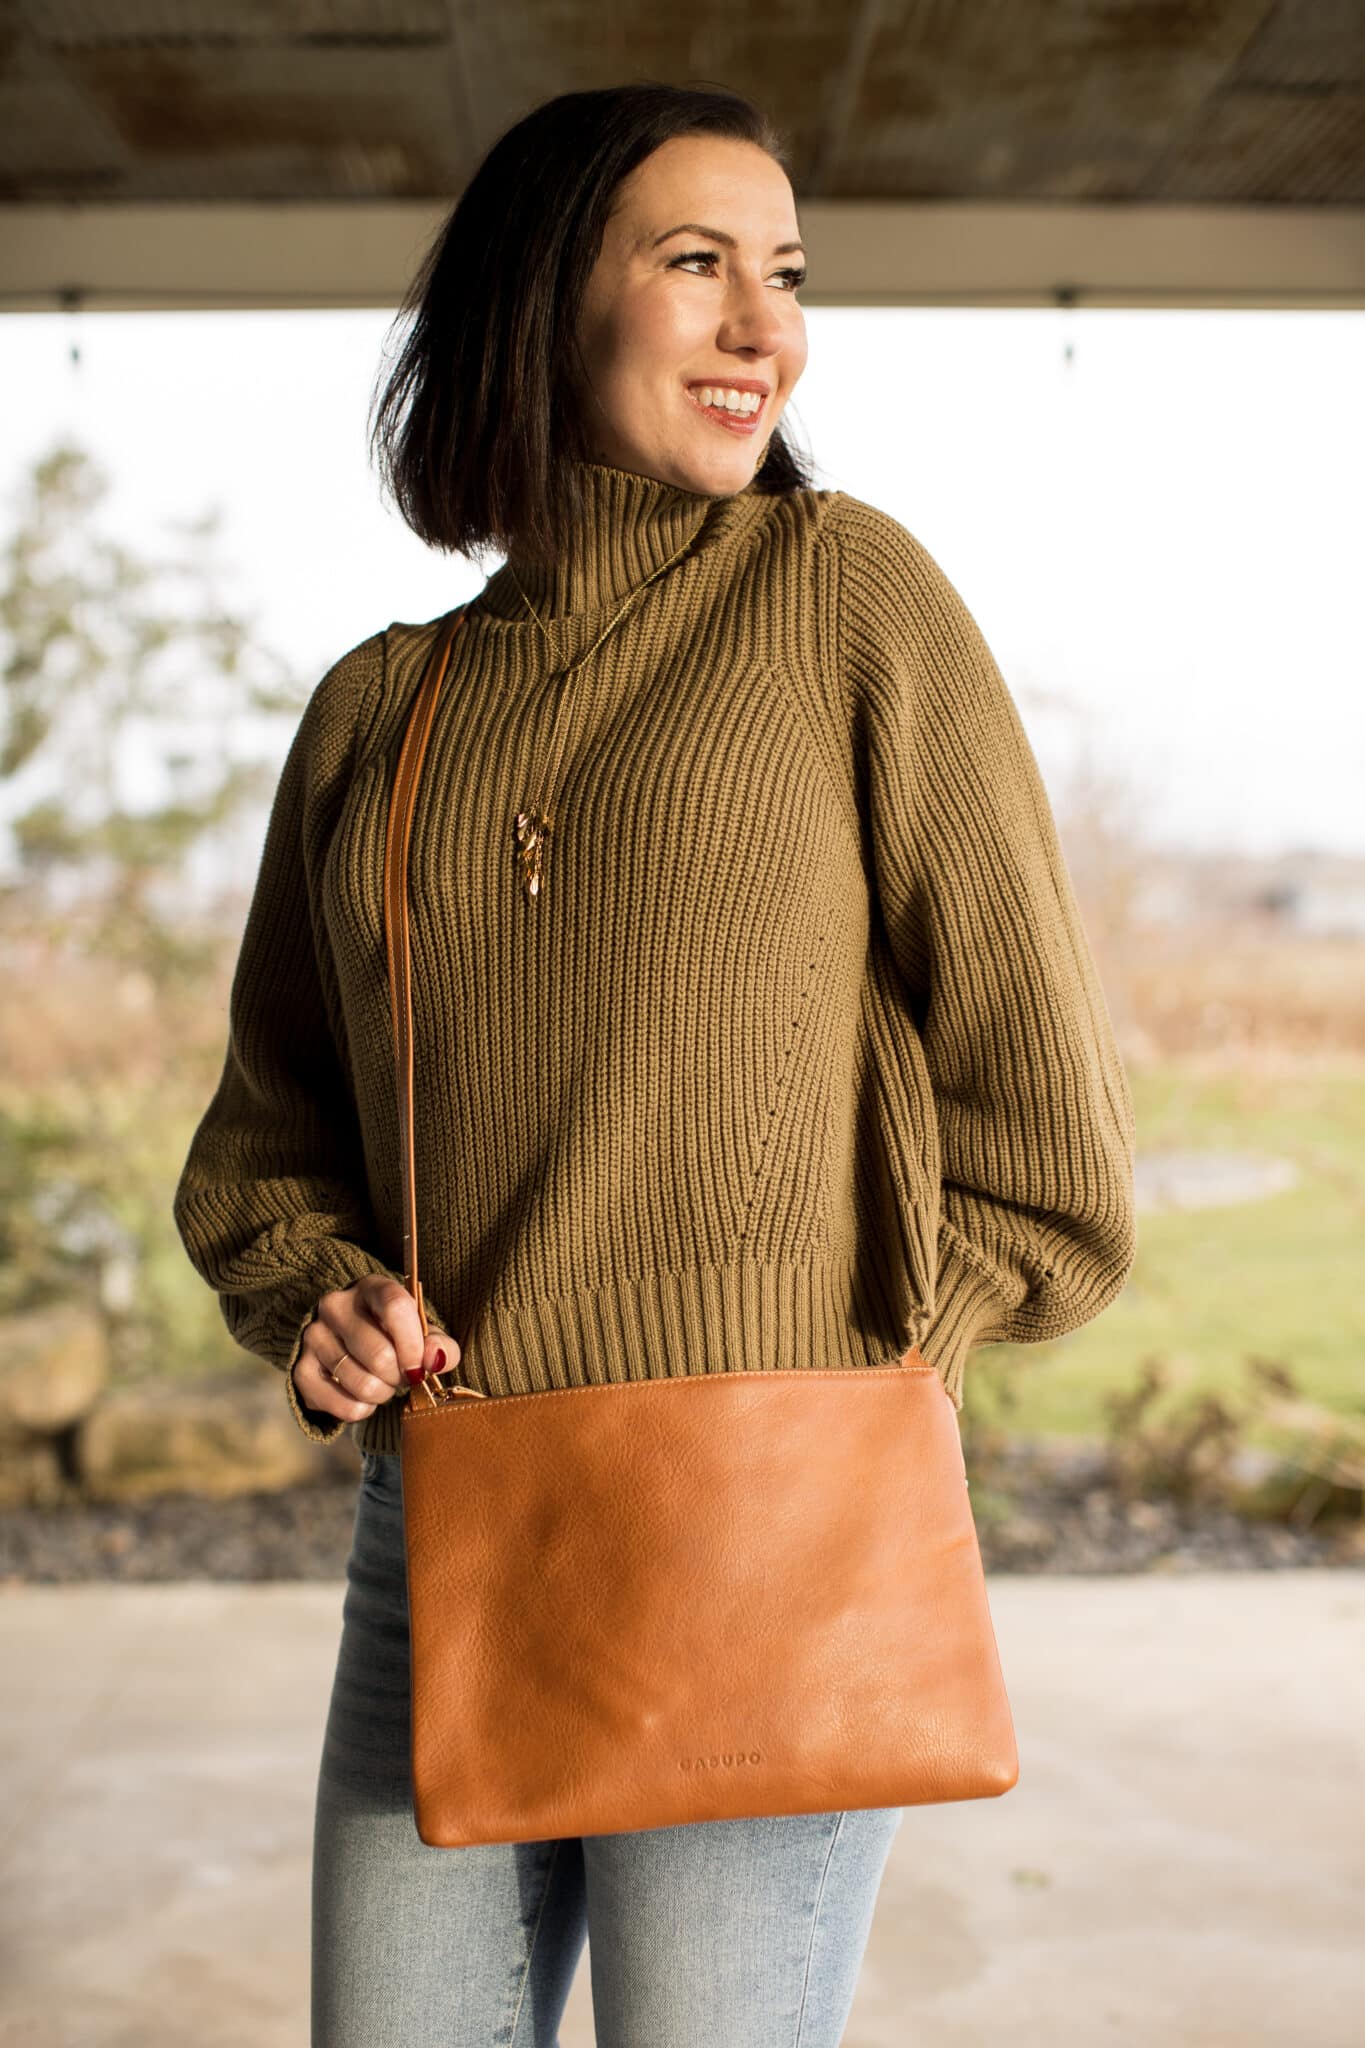 Lindsey wearing an olive green turtle neck sweater and jeans with a Casupo leather crossbody bag